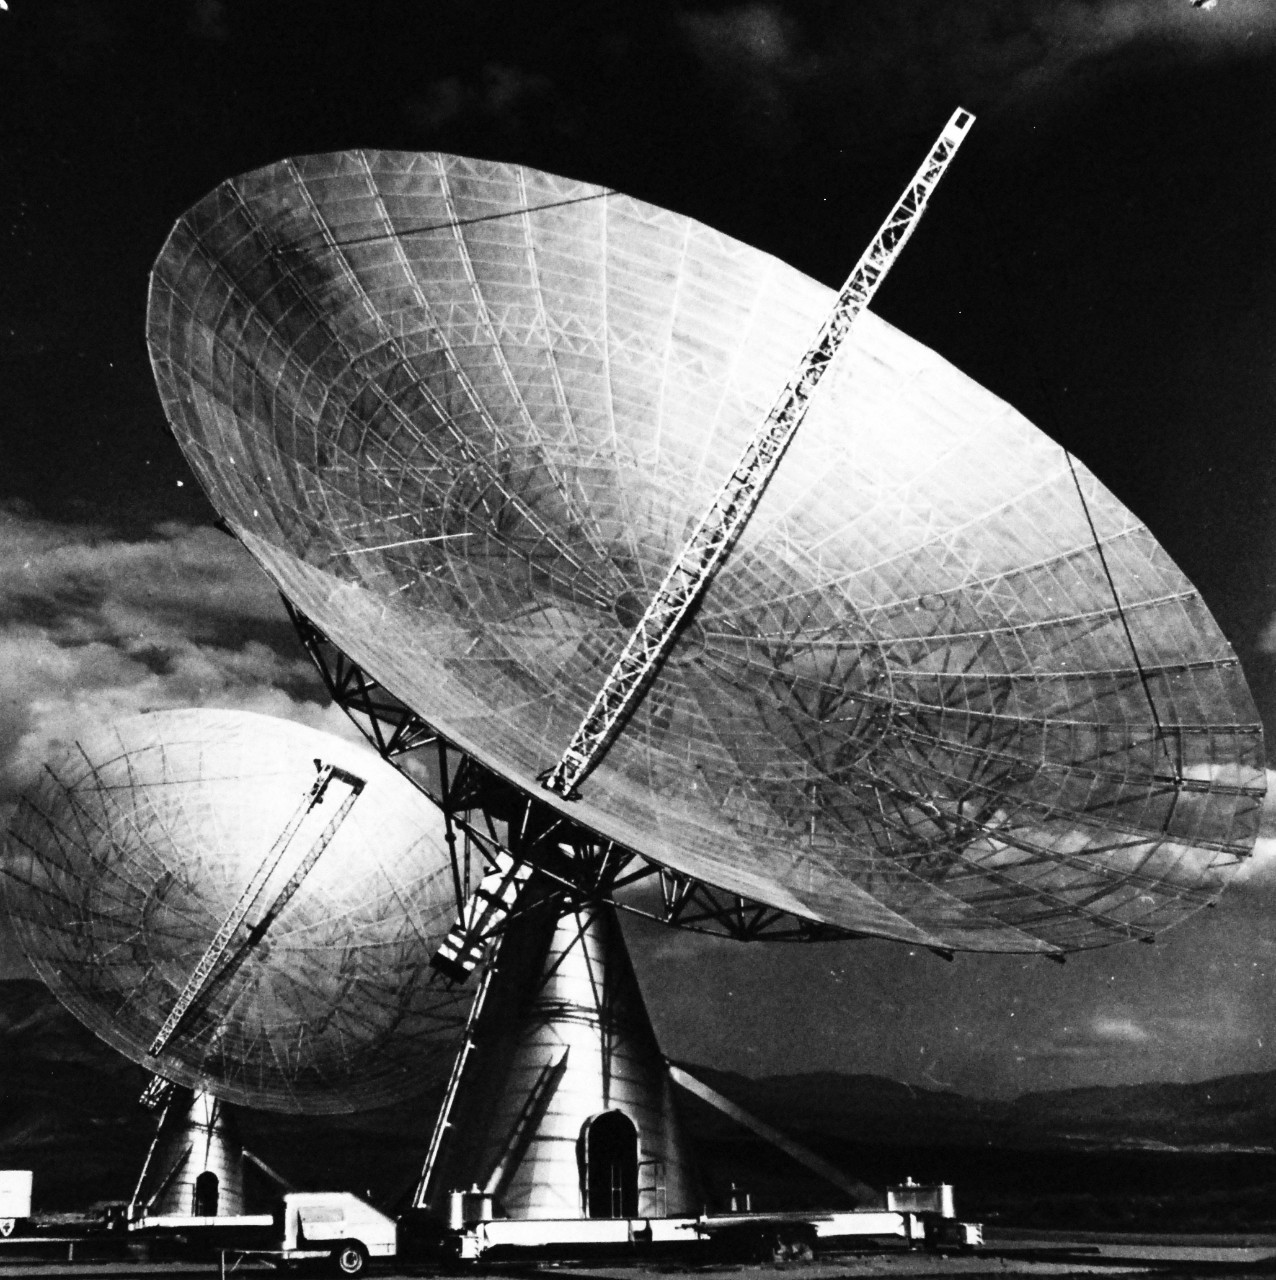 USN 710653:   U.S. Navy Telescope Locates New Radio Sources in Space, March 1960.  Nine Radio sources from outside our galaxy have been located in the first two months of operation of a new Navy twin radio telescope.  Up to the end of 1959, when the Navy telescope went into full operation, only five other radio sources of the more than 100 detected outside the Milky Way had been precisely located and identified by all the radio telescopes of the world.  The giant instrument was built by and is operated by the California Institute of Technology under contract with the Office of Naval Research as part of the Navy’s Radio Astronomy program.  Located in a valley 259 miles from Los Angeles, the radio telescope consists of two 90-foot parabola antennas mounted on a 1600-foot long railroad track running east-west.  Working in tandem, the twin dishes produce a resolving power (i.e. ability to pinpoint radiating objects in space separated by small angular distances).  Greater than any known radio telescope in operation or under construction.  Currently, the radio telescope is being used to try to identify other radio sources in space.  The twin dishes can also be used to study planets and other large celestial bodies.  Two planets can be studied at the same time by using such each dish independently.  The new radio telescope may also be use in resolving the conflict of opinion as to whether the planet Jupiter is surrounded by a corona or by a Van Allen type radiation belt.  Photograph released 22 March 1960.  Official. U.S. Navy Photograph, now in the collections of the National Archives.  